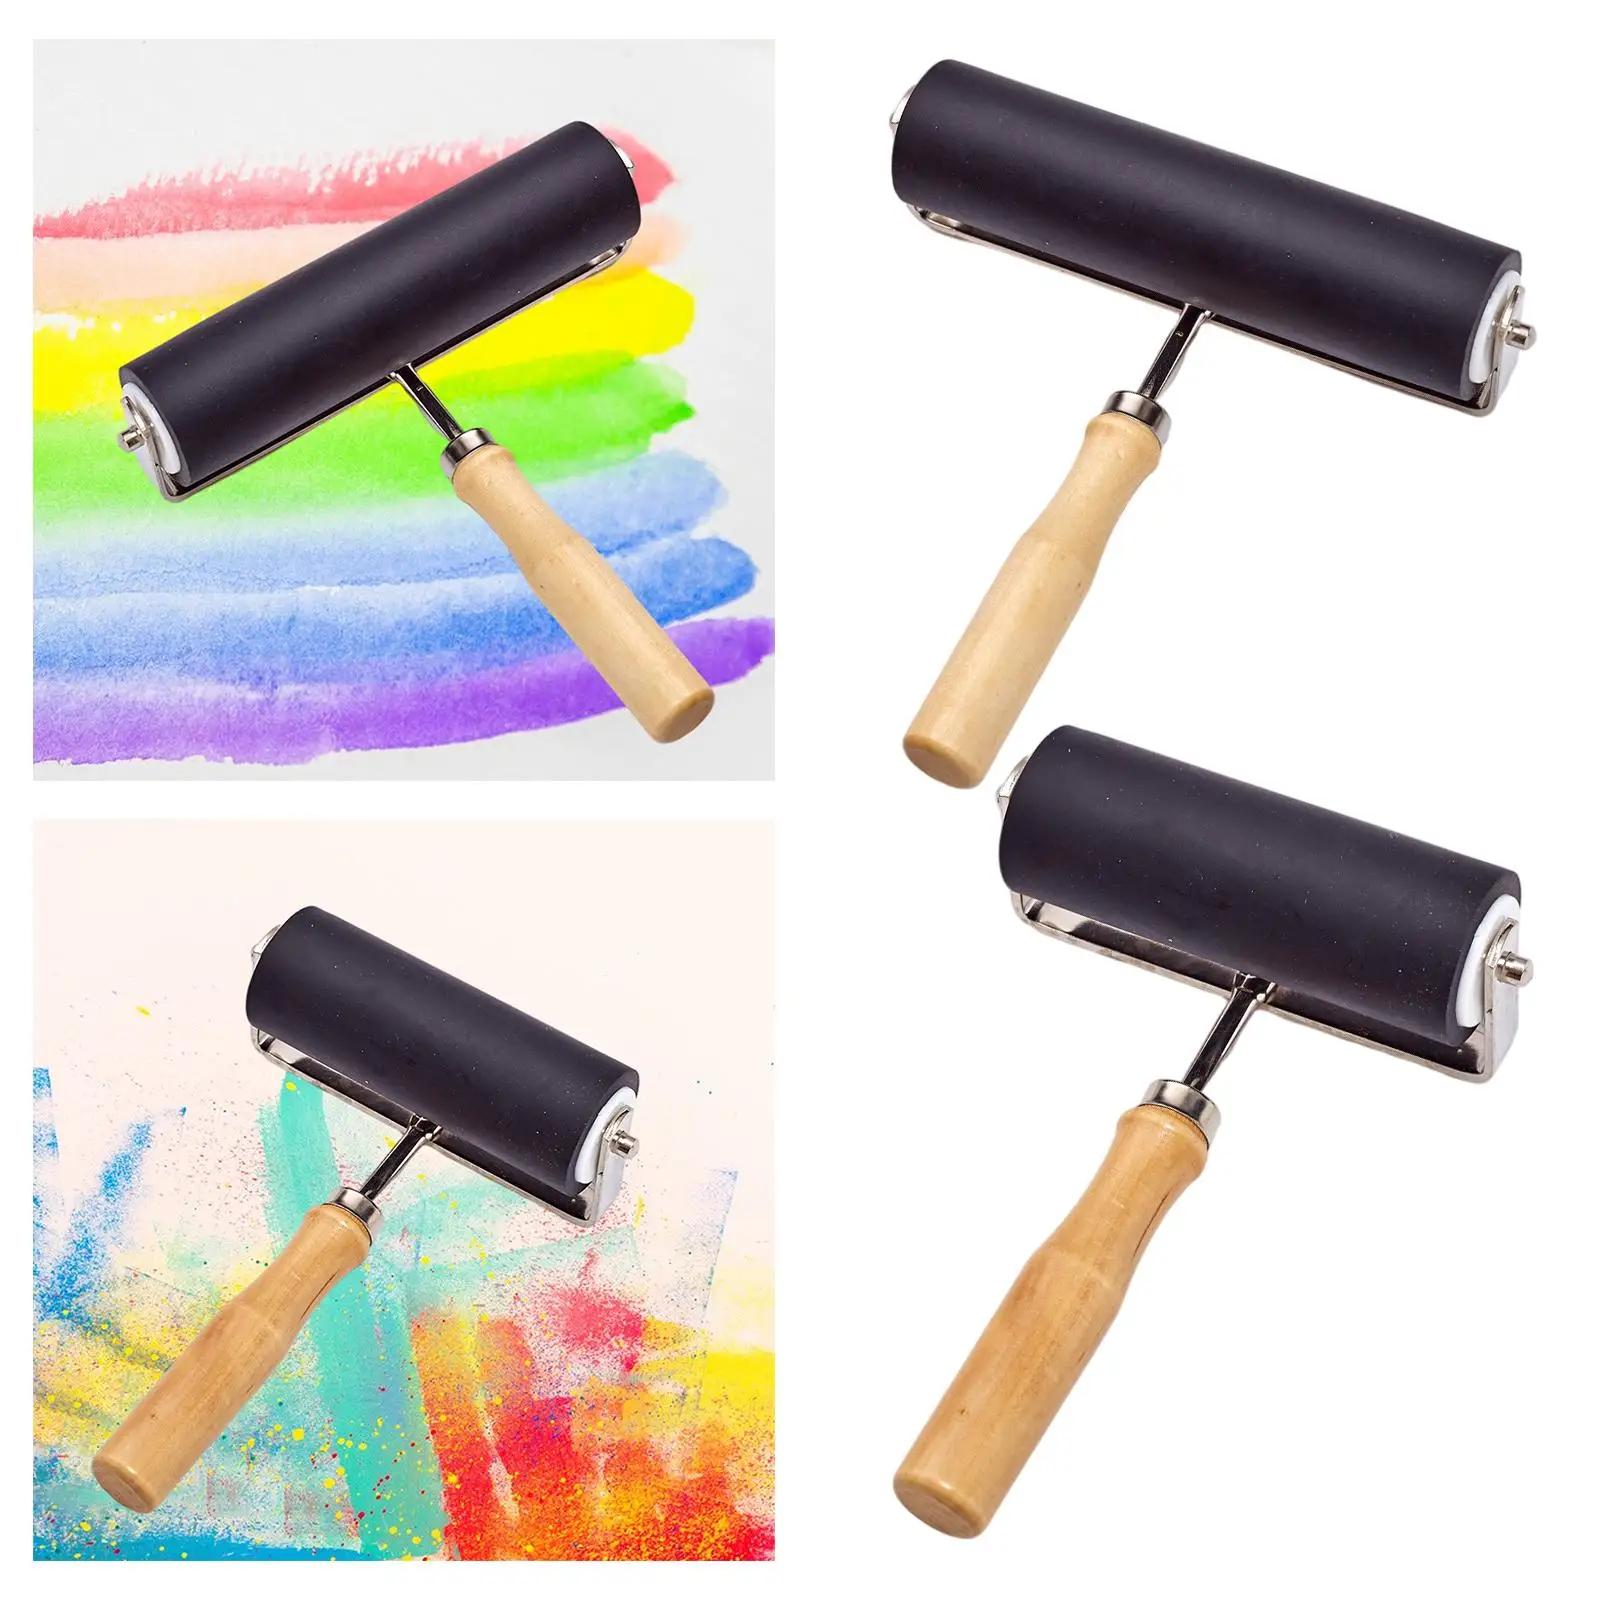 Heavy Duty Rubber Roller Stamping Tool Wood Handle Painting Printmaking Glue